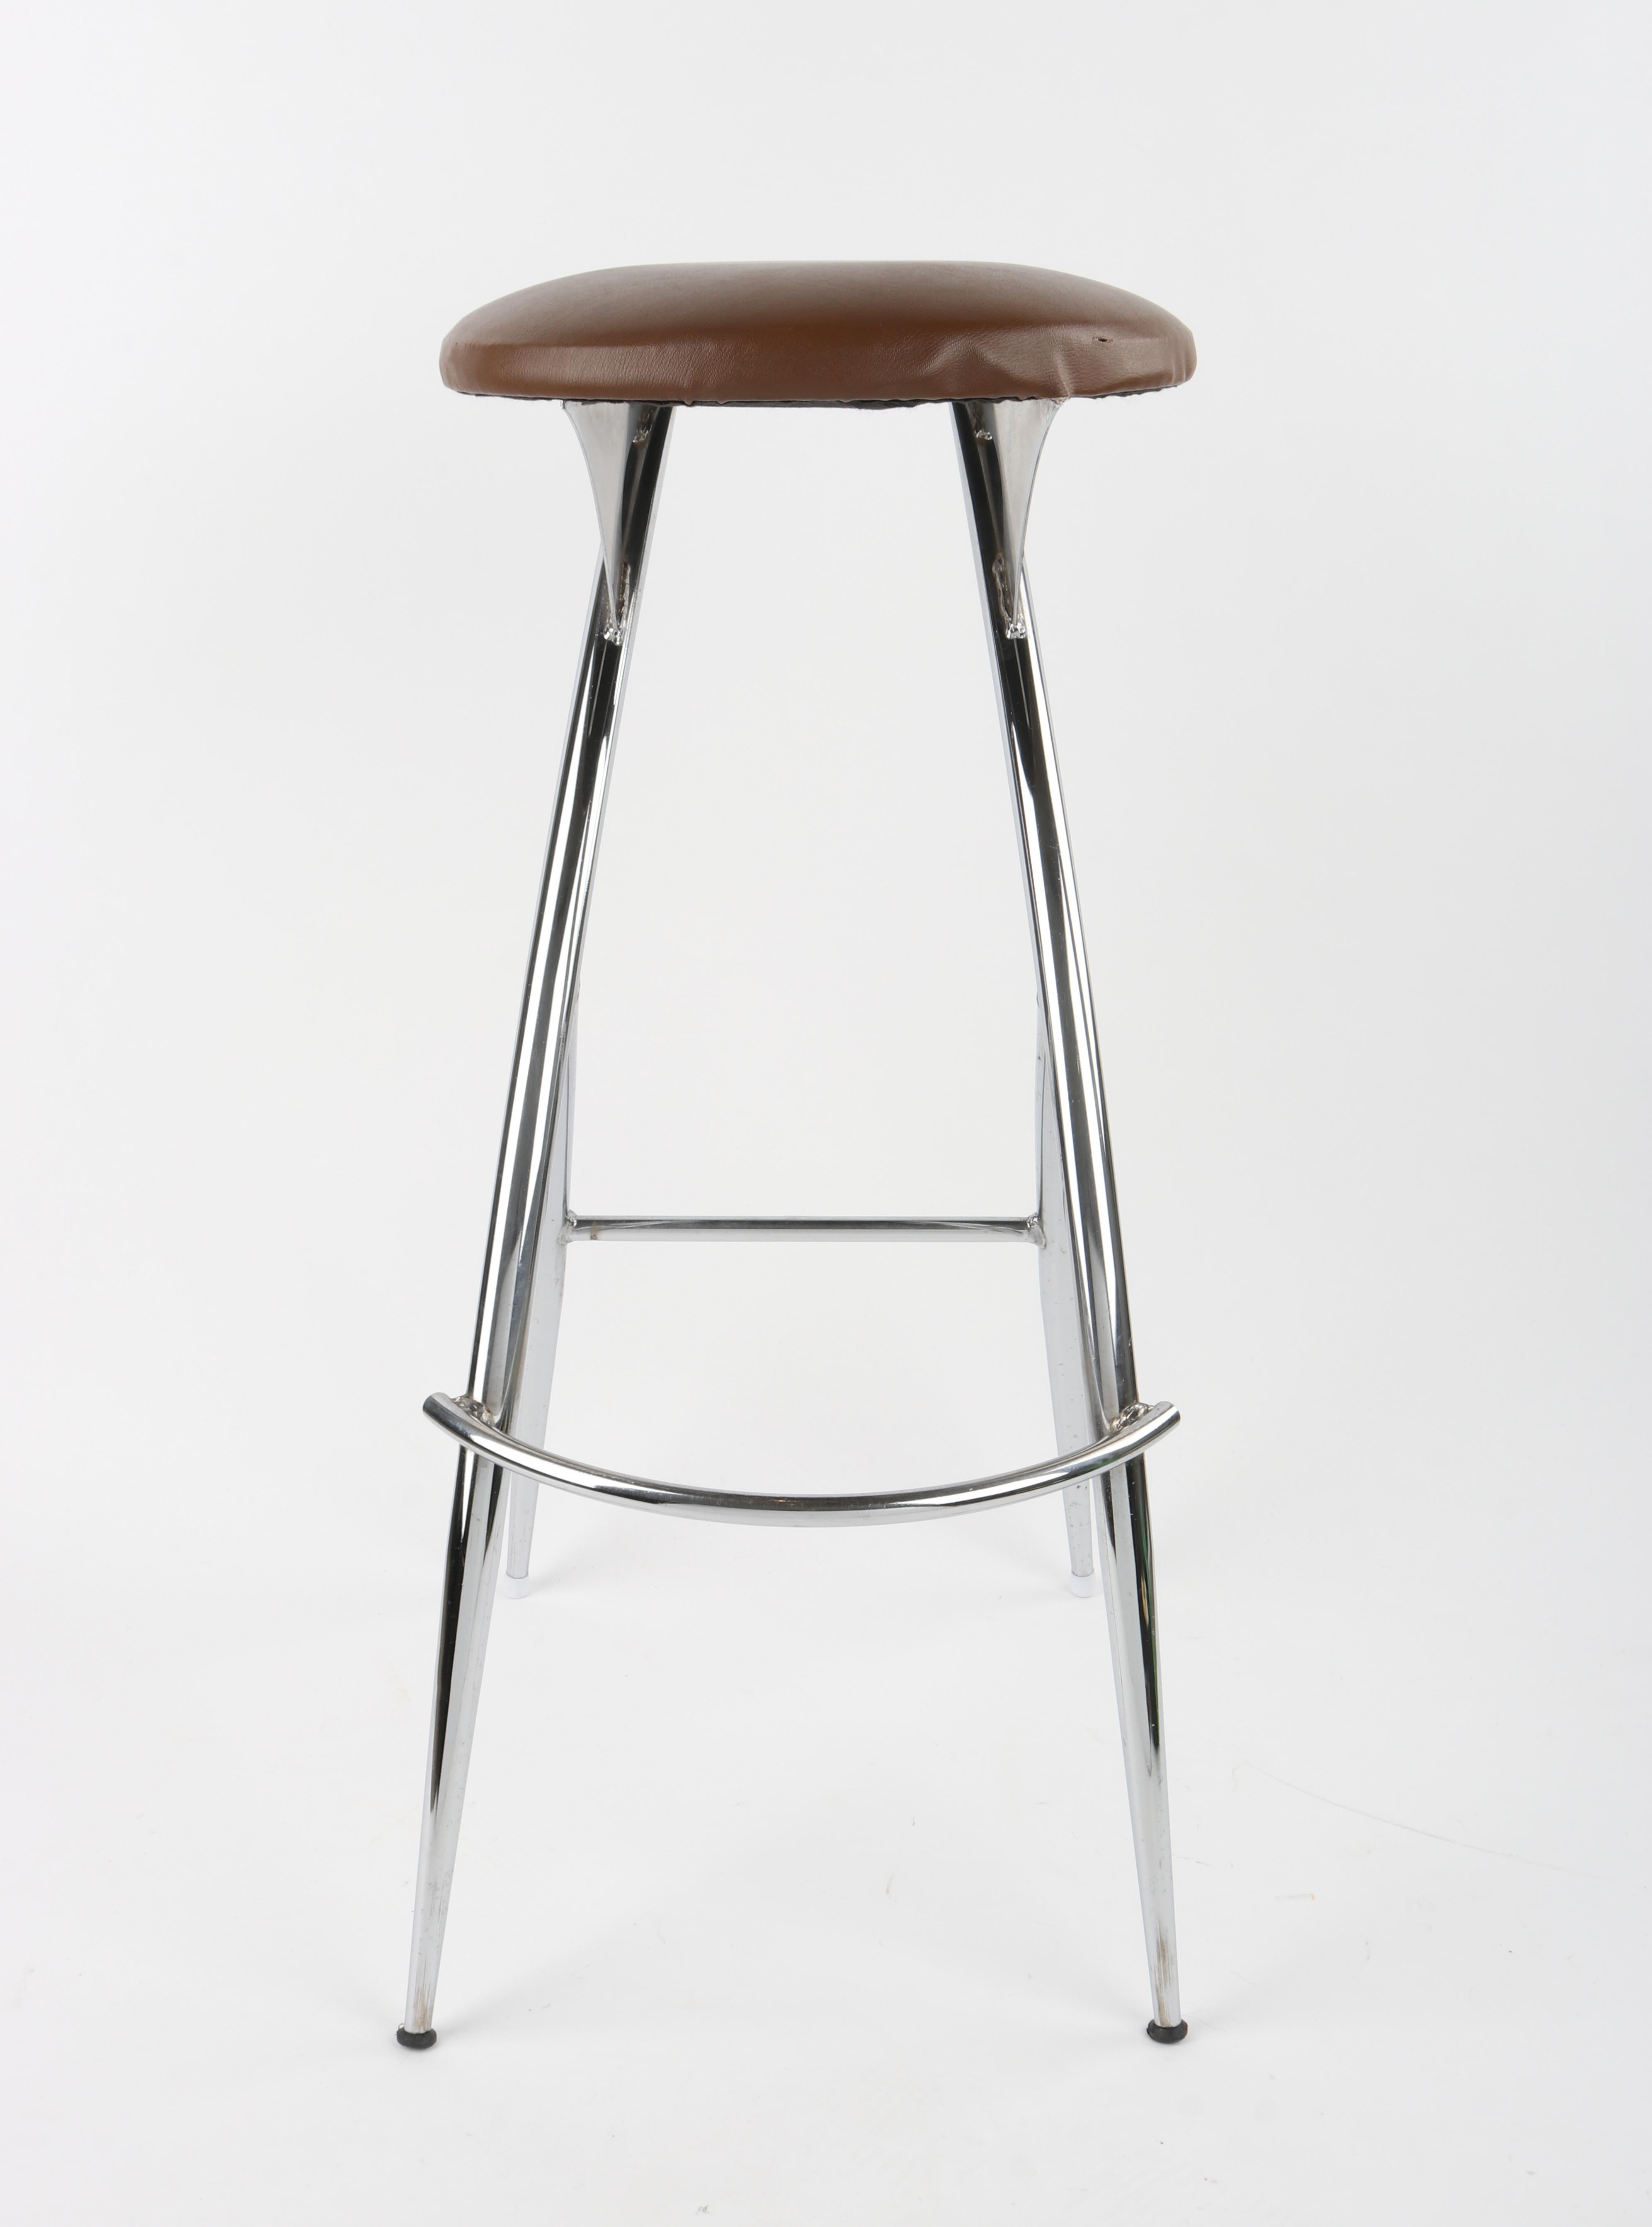 Upholstery Sandler Seating c.1990s Chrome Upholstered Architectural Curved Bar Stools Set For Sale